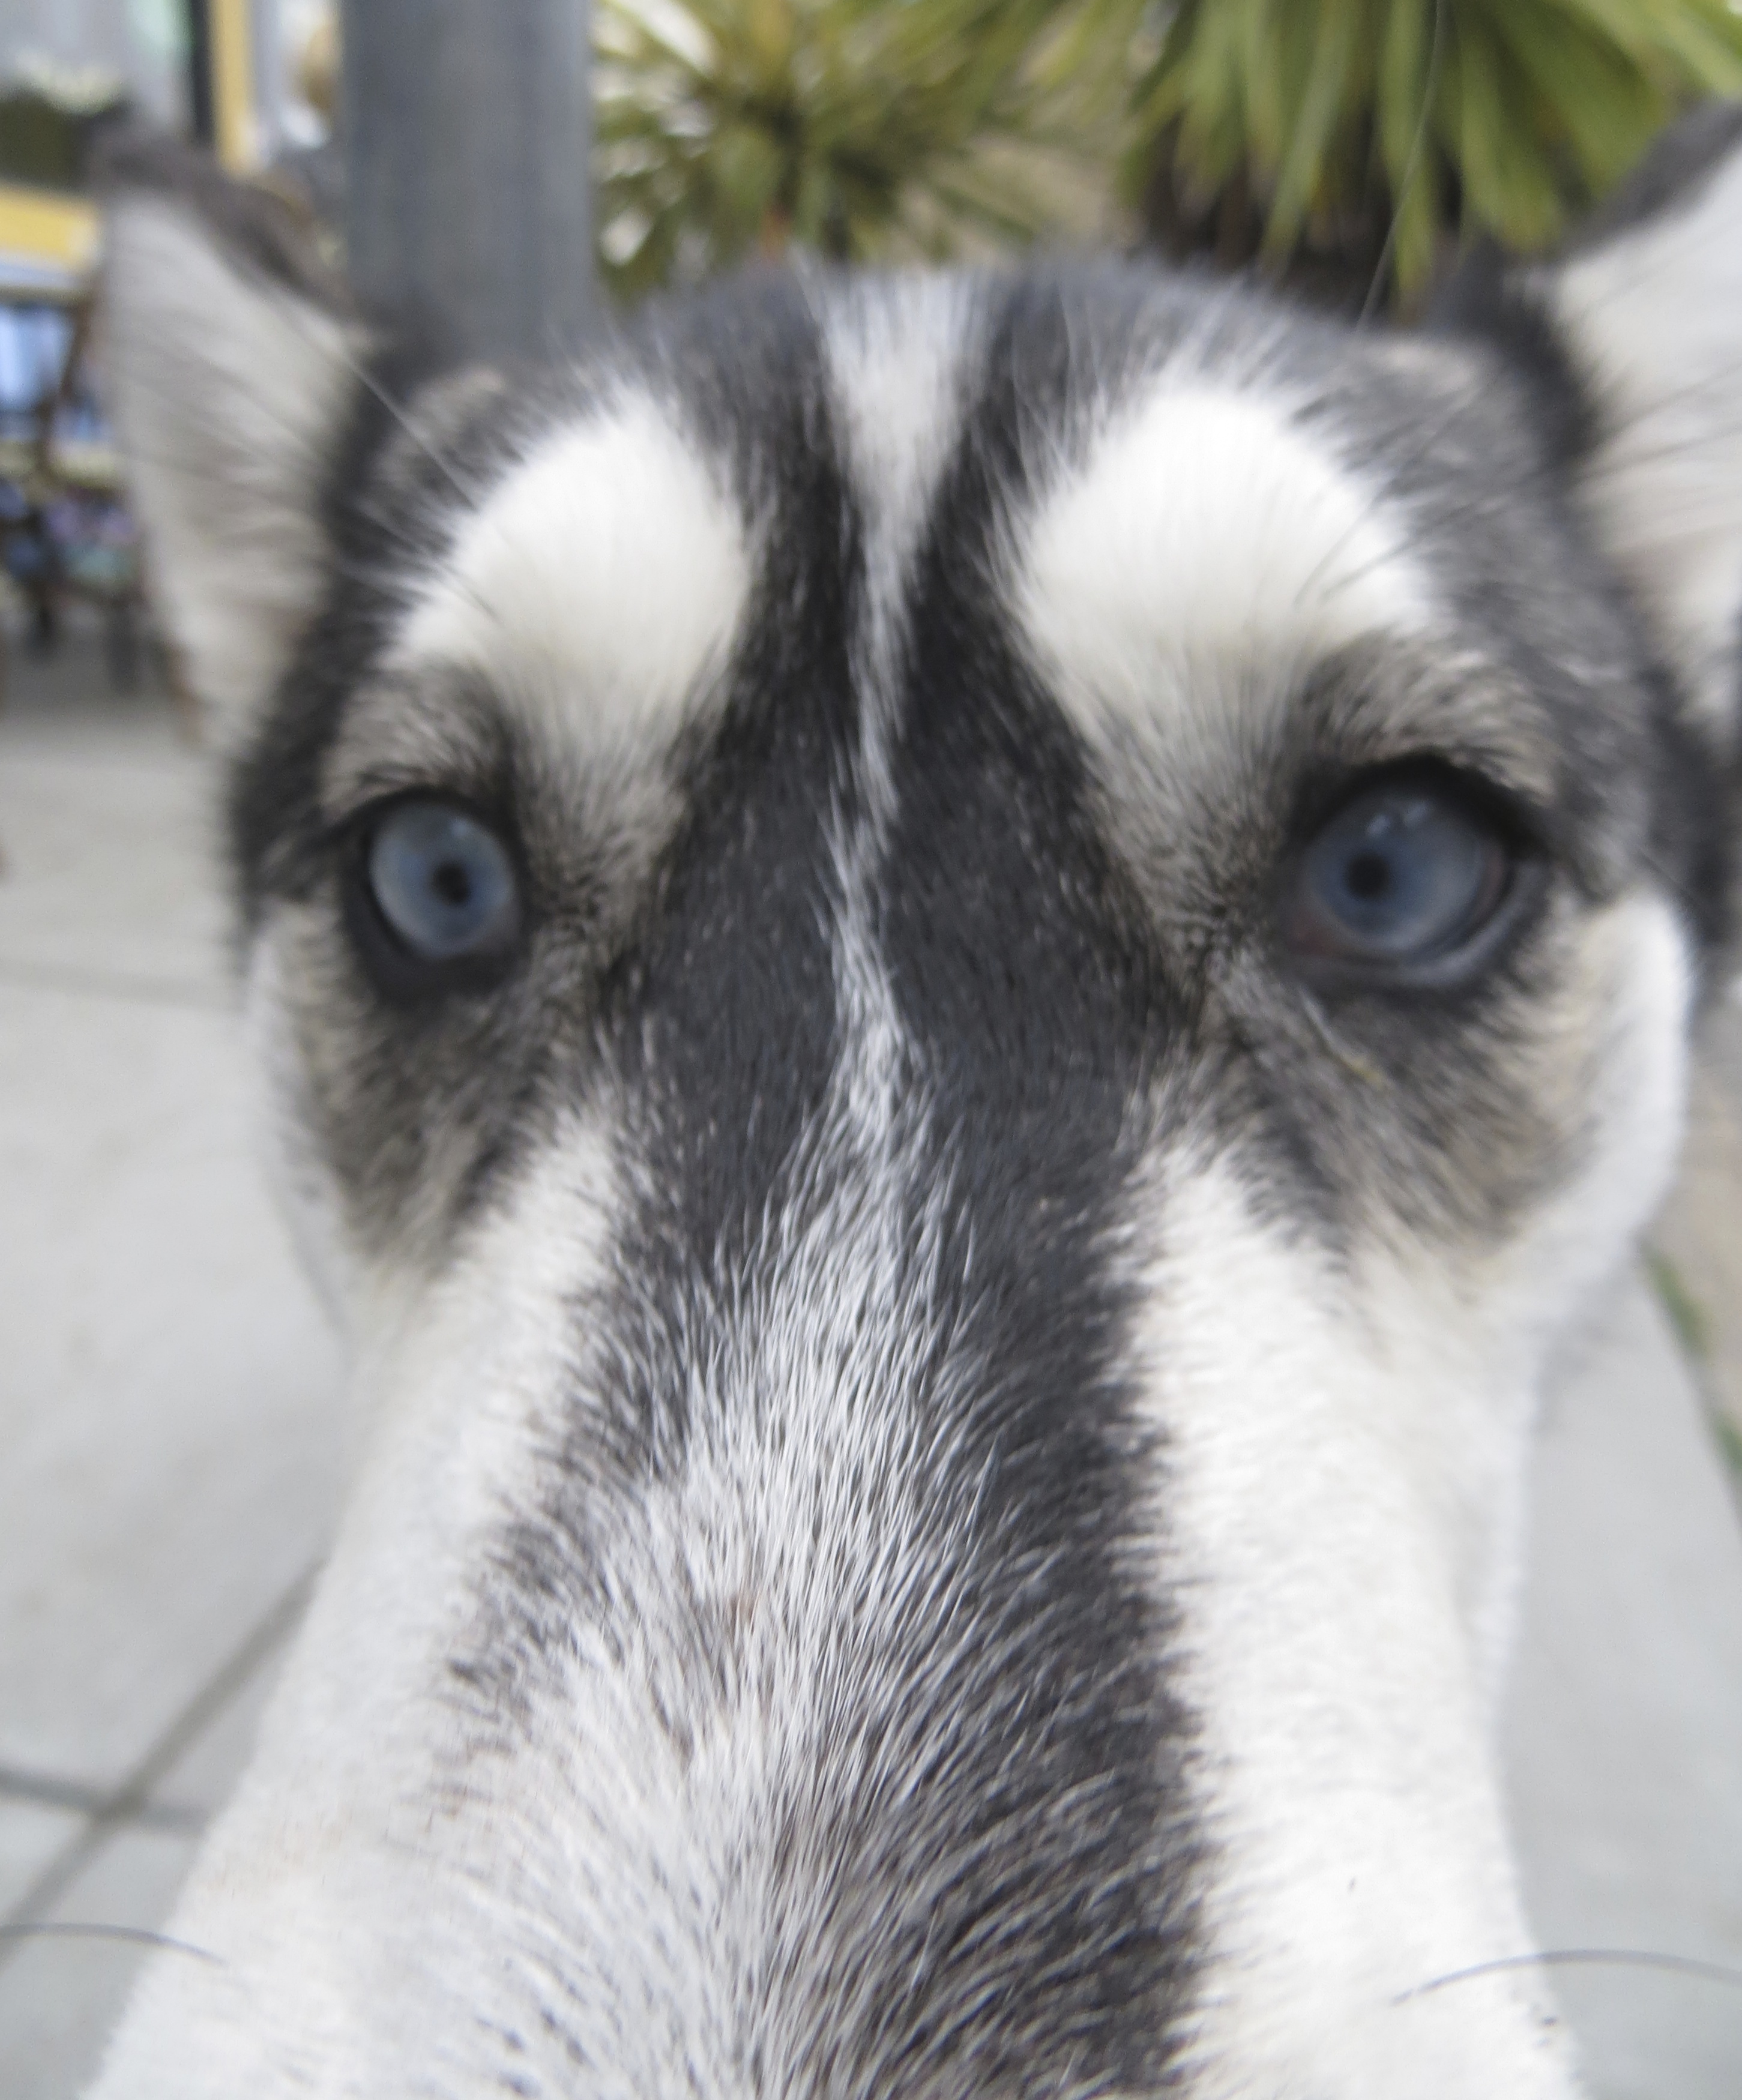 Agouti and White Siberian Husky With Light Blue Eyes Sticking Her Nose In My Camera